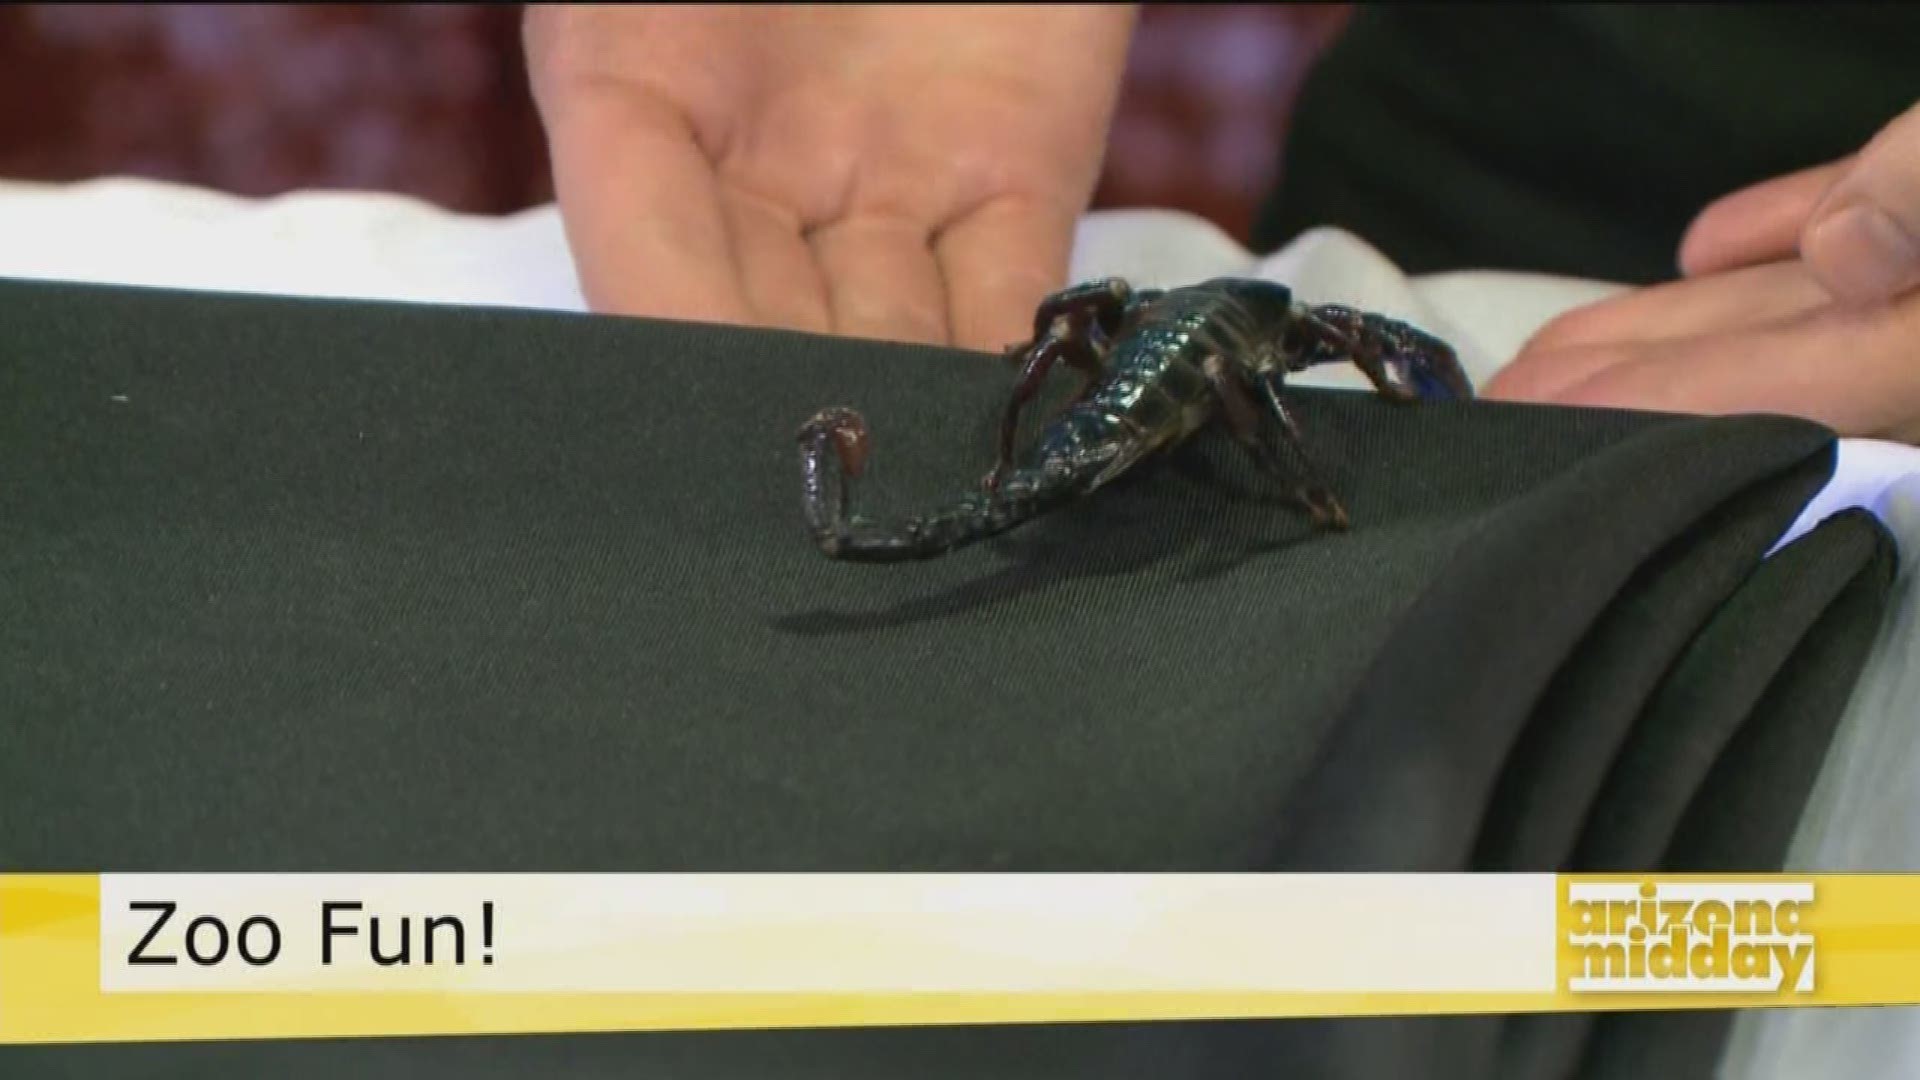 Kristy Morcom from the Wildlife World Zoo and Aquarium shows us the luminous Emperor scorpion and tells us how we could win a one year membership to the zoo.